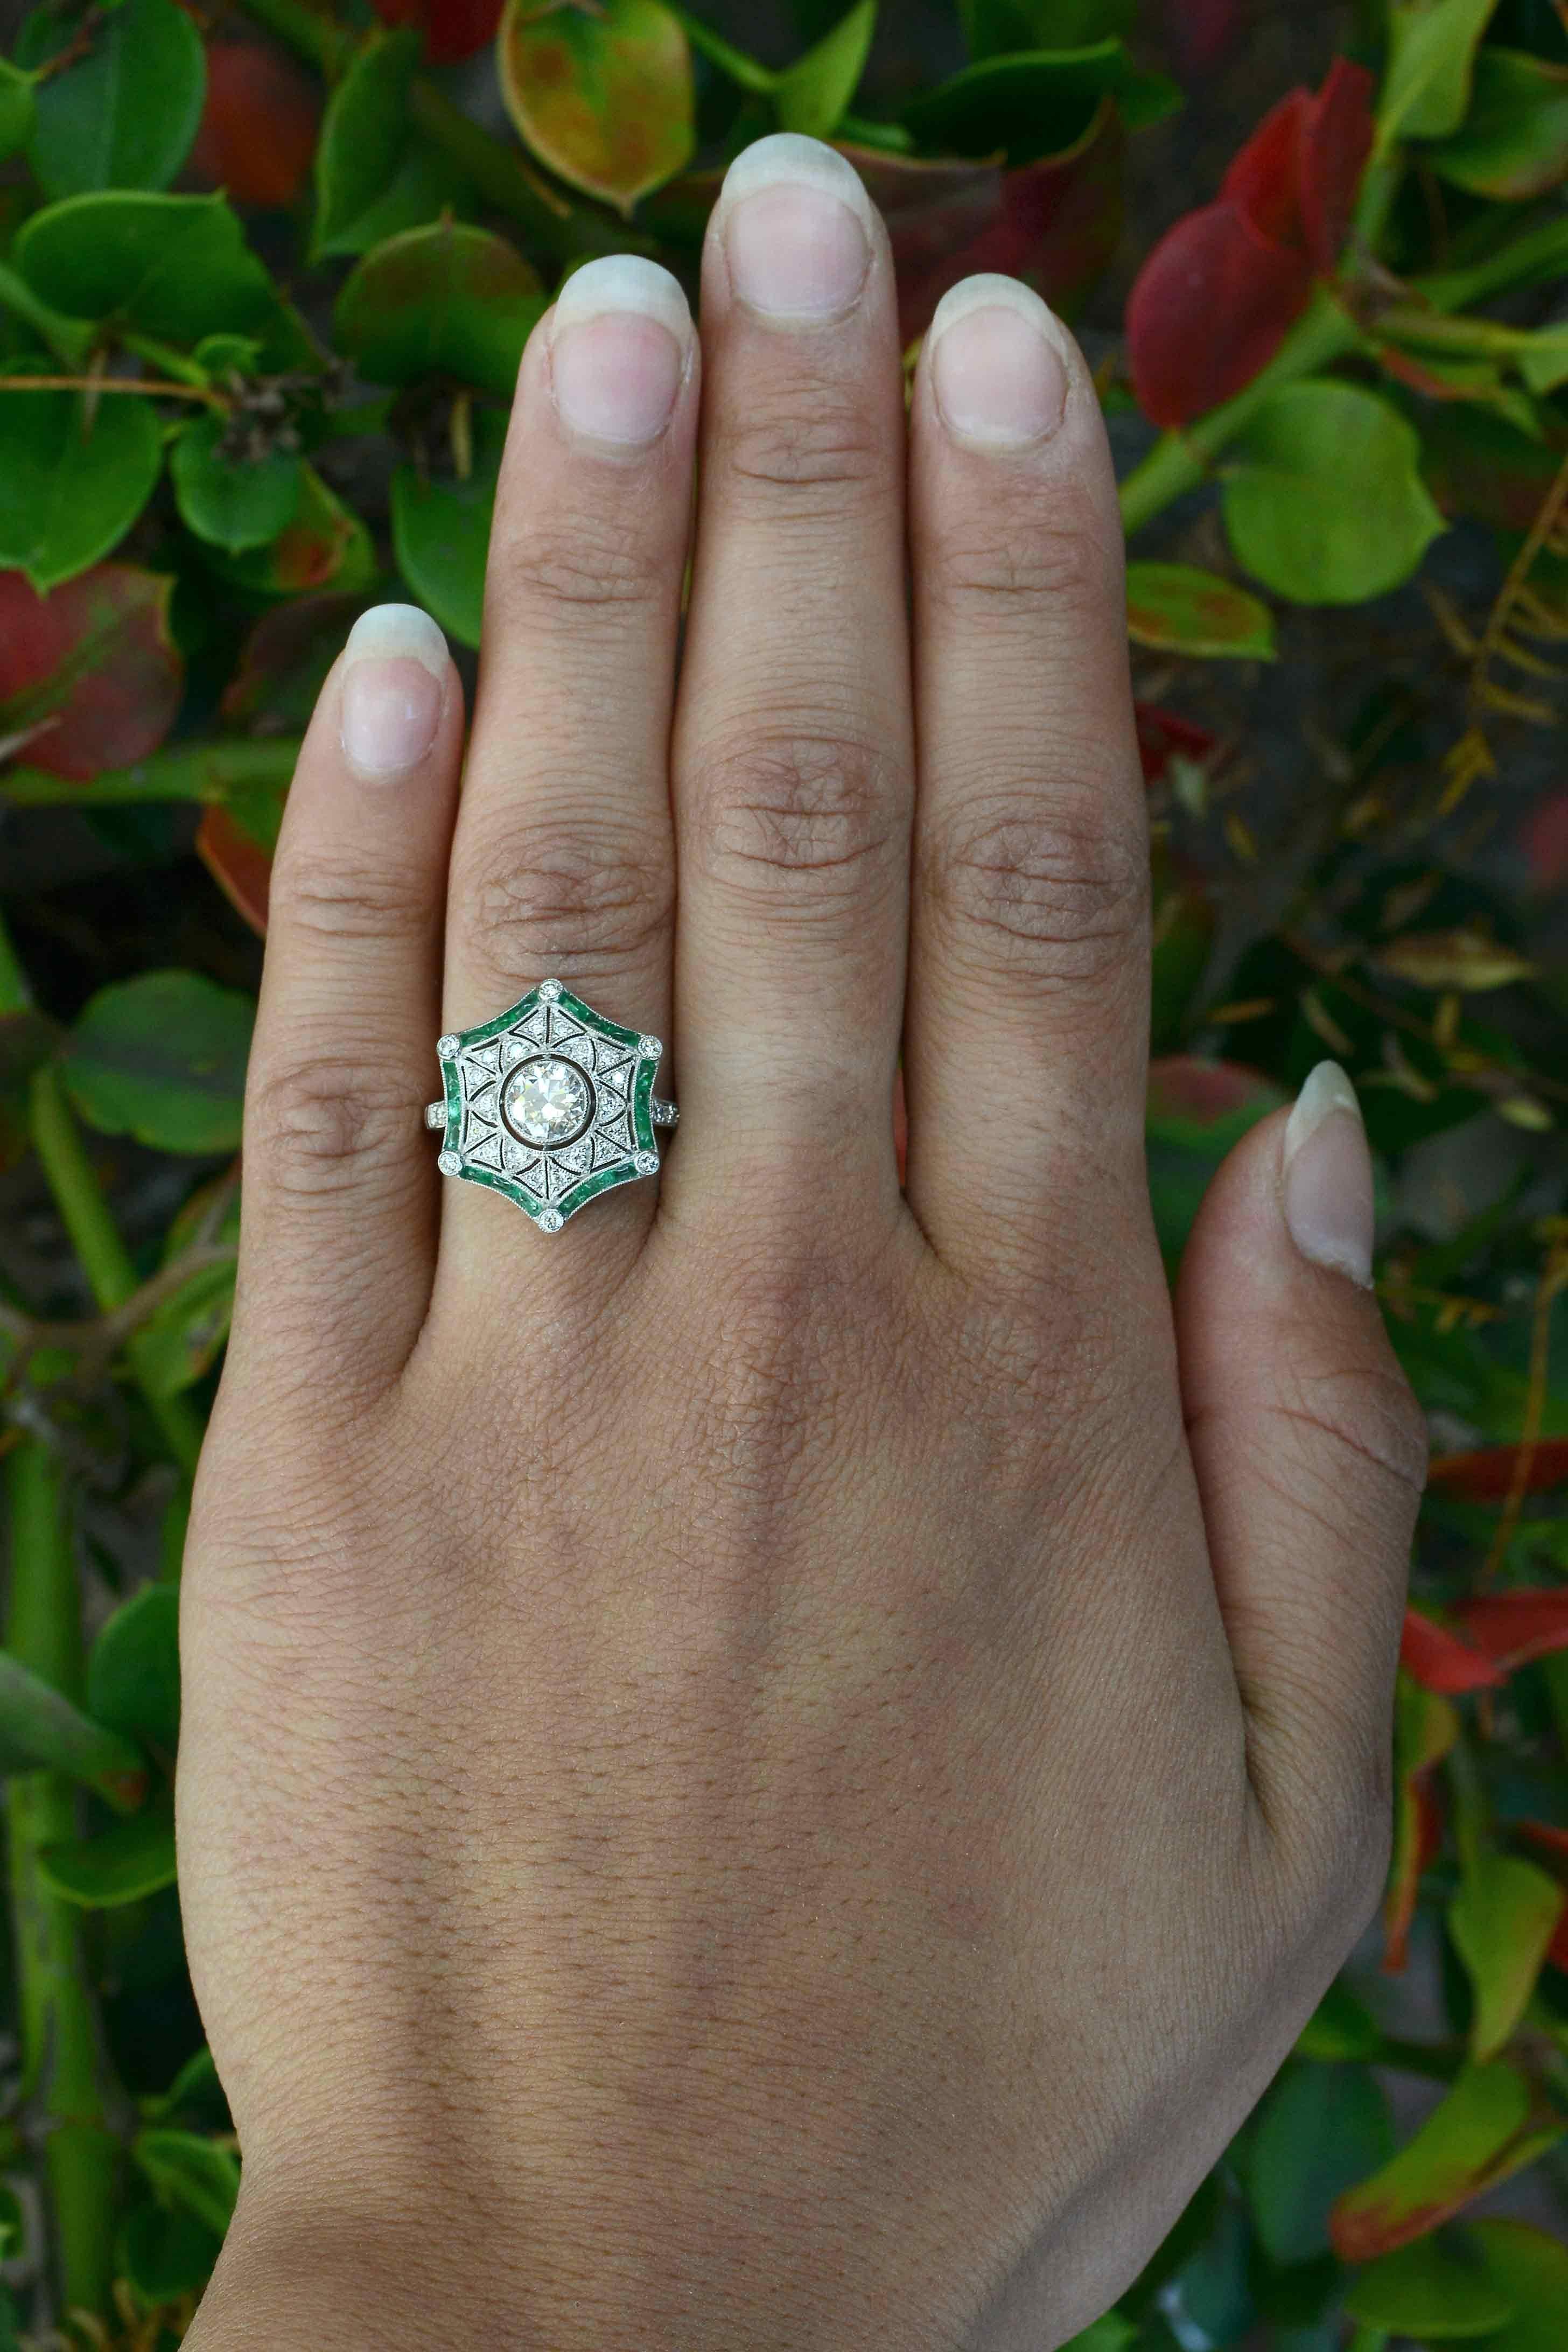 A revivalist Art Deco Style diamond emerald engagement ring of a fascinating star design. Centered by a bezel set 3/4 carat diamond with a fiery and brilliant scintilllation surrounded by highly detailed filigree openwork accented by lush emerald